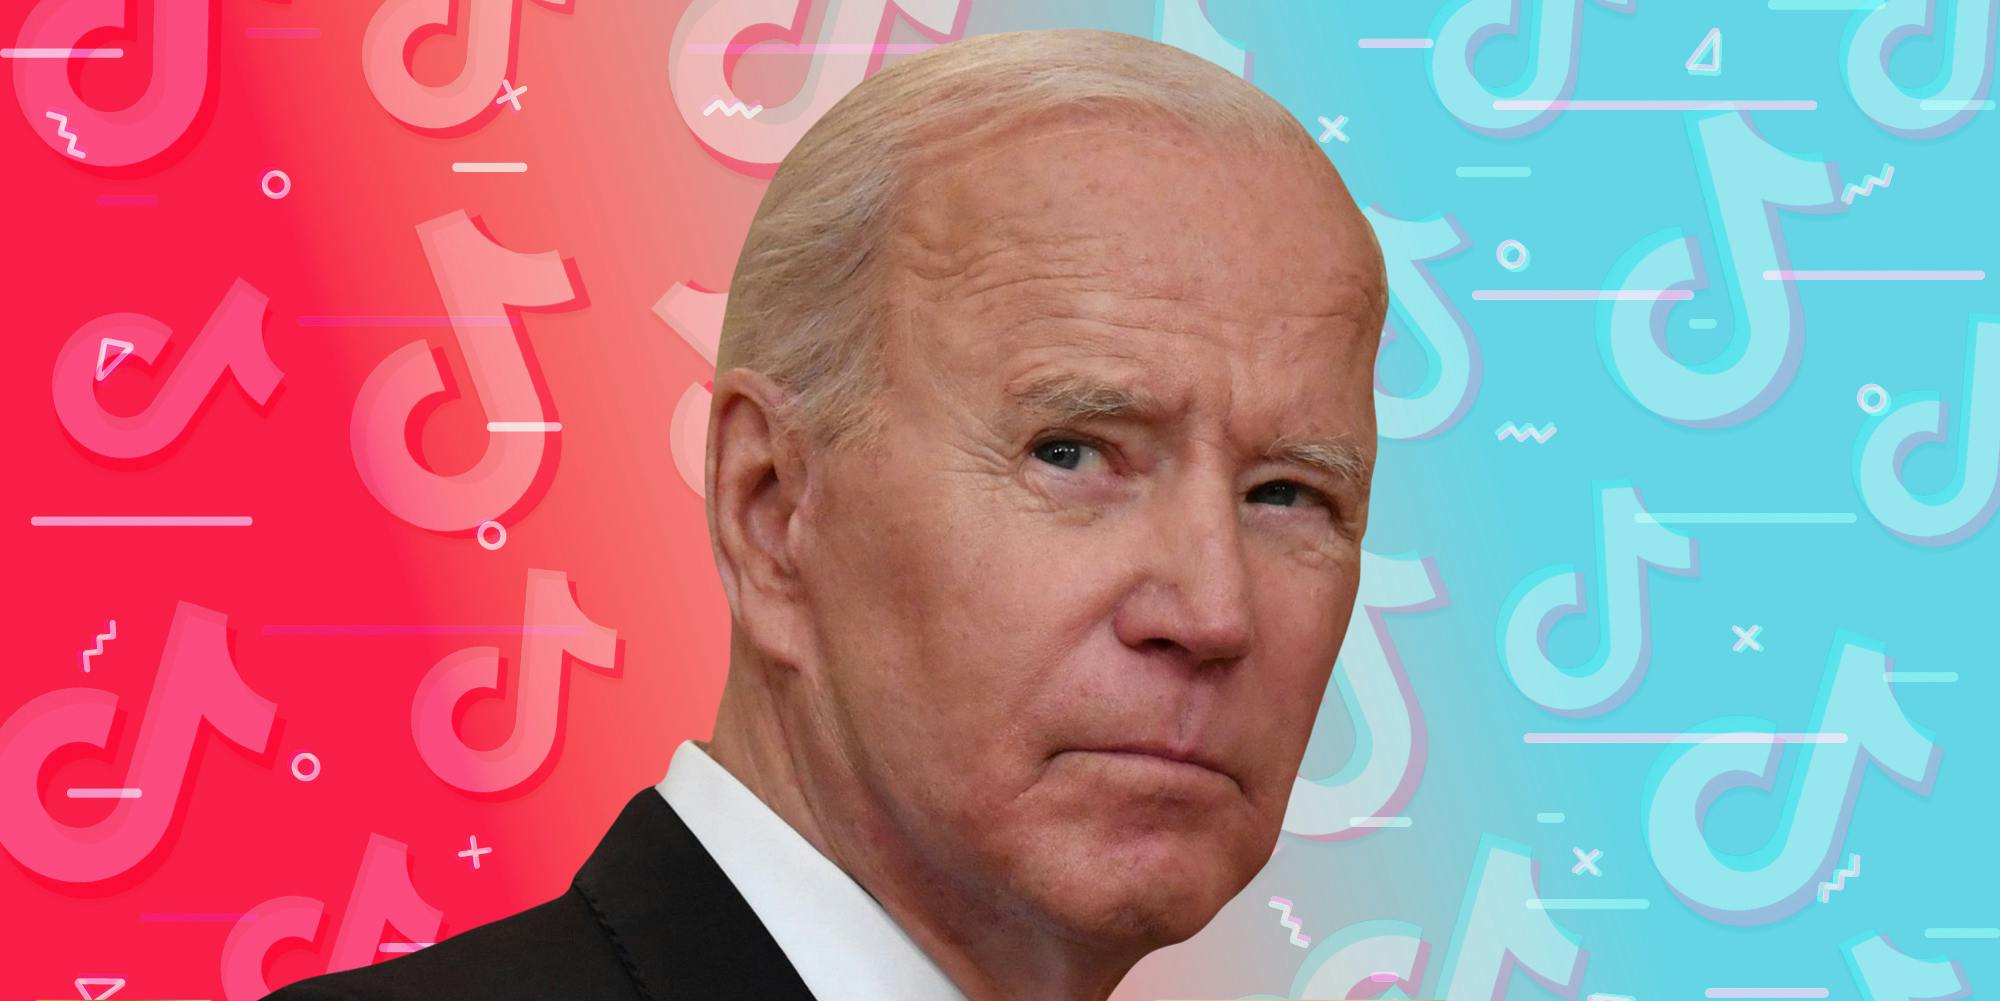 Bill Designed To Let Biden Ban TikTok Approved By House Panel